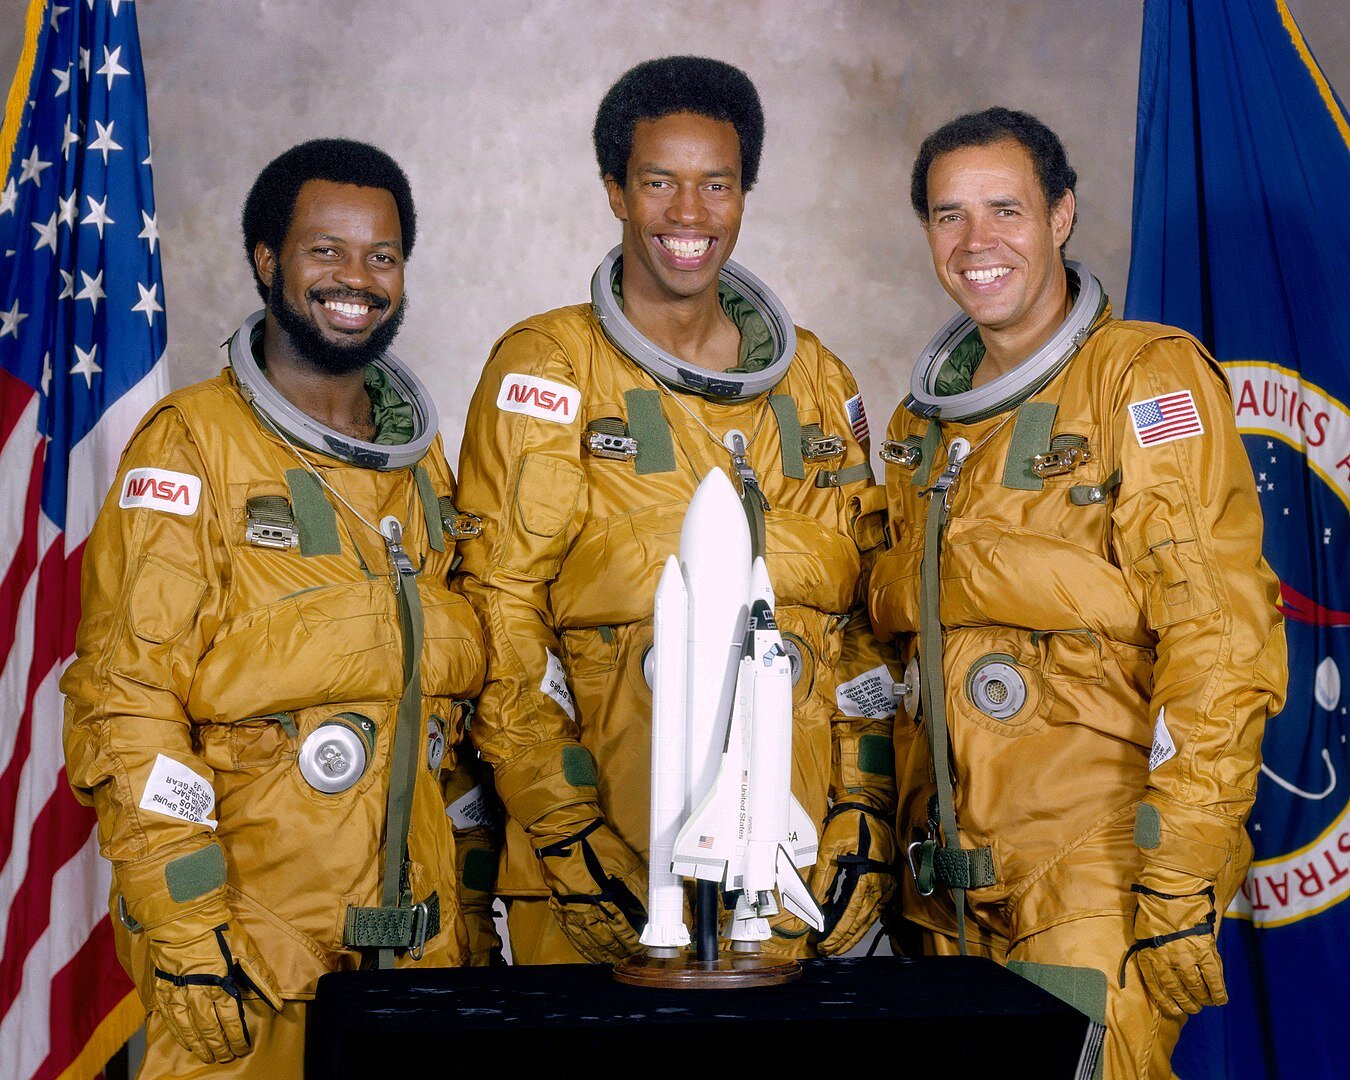 1350px-Ronald_McNair,_Guion_Bluford,_and_Fred_Gregory_(S79-36529,_restoration).jpg